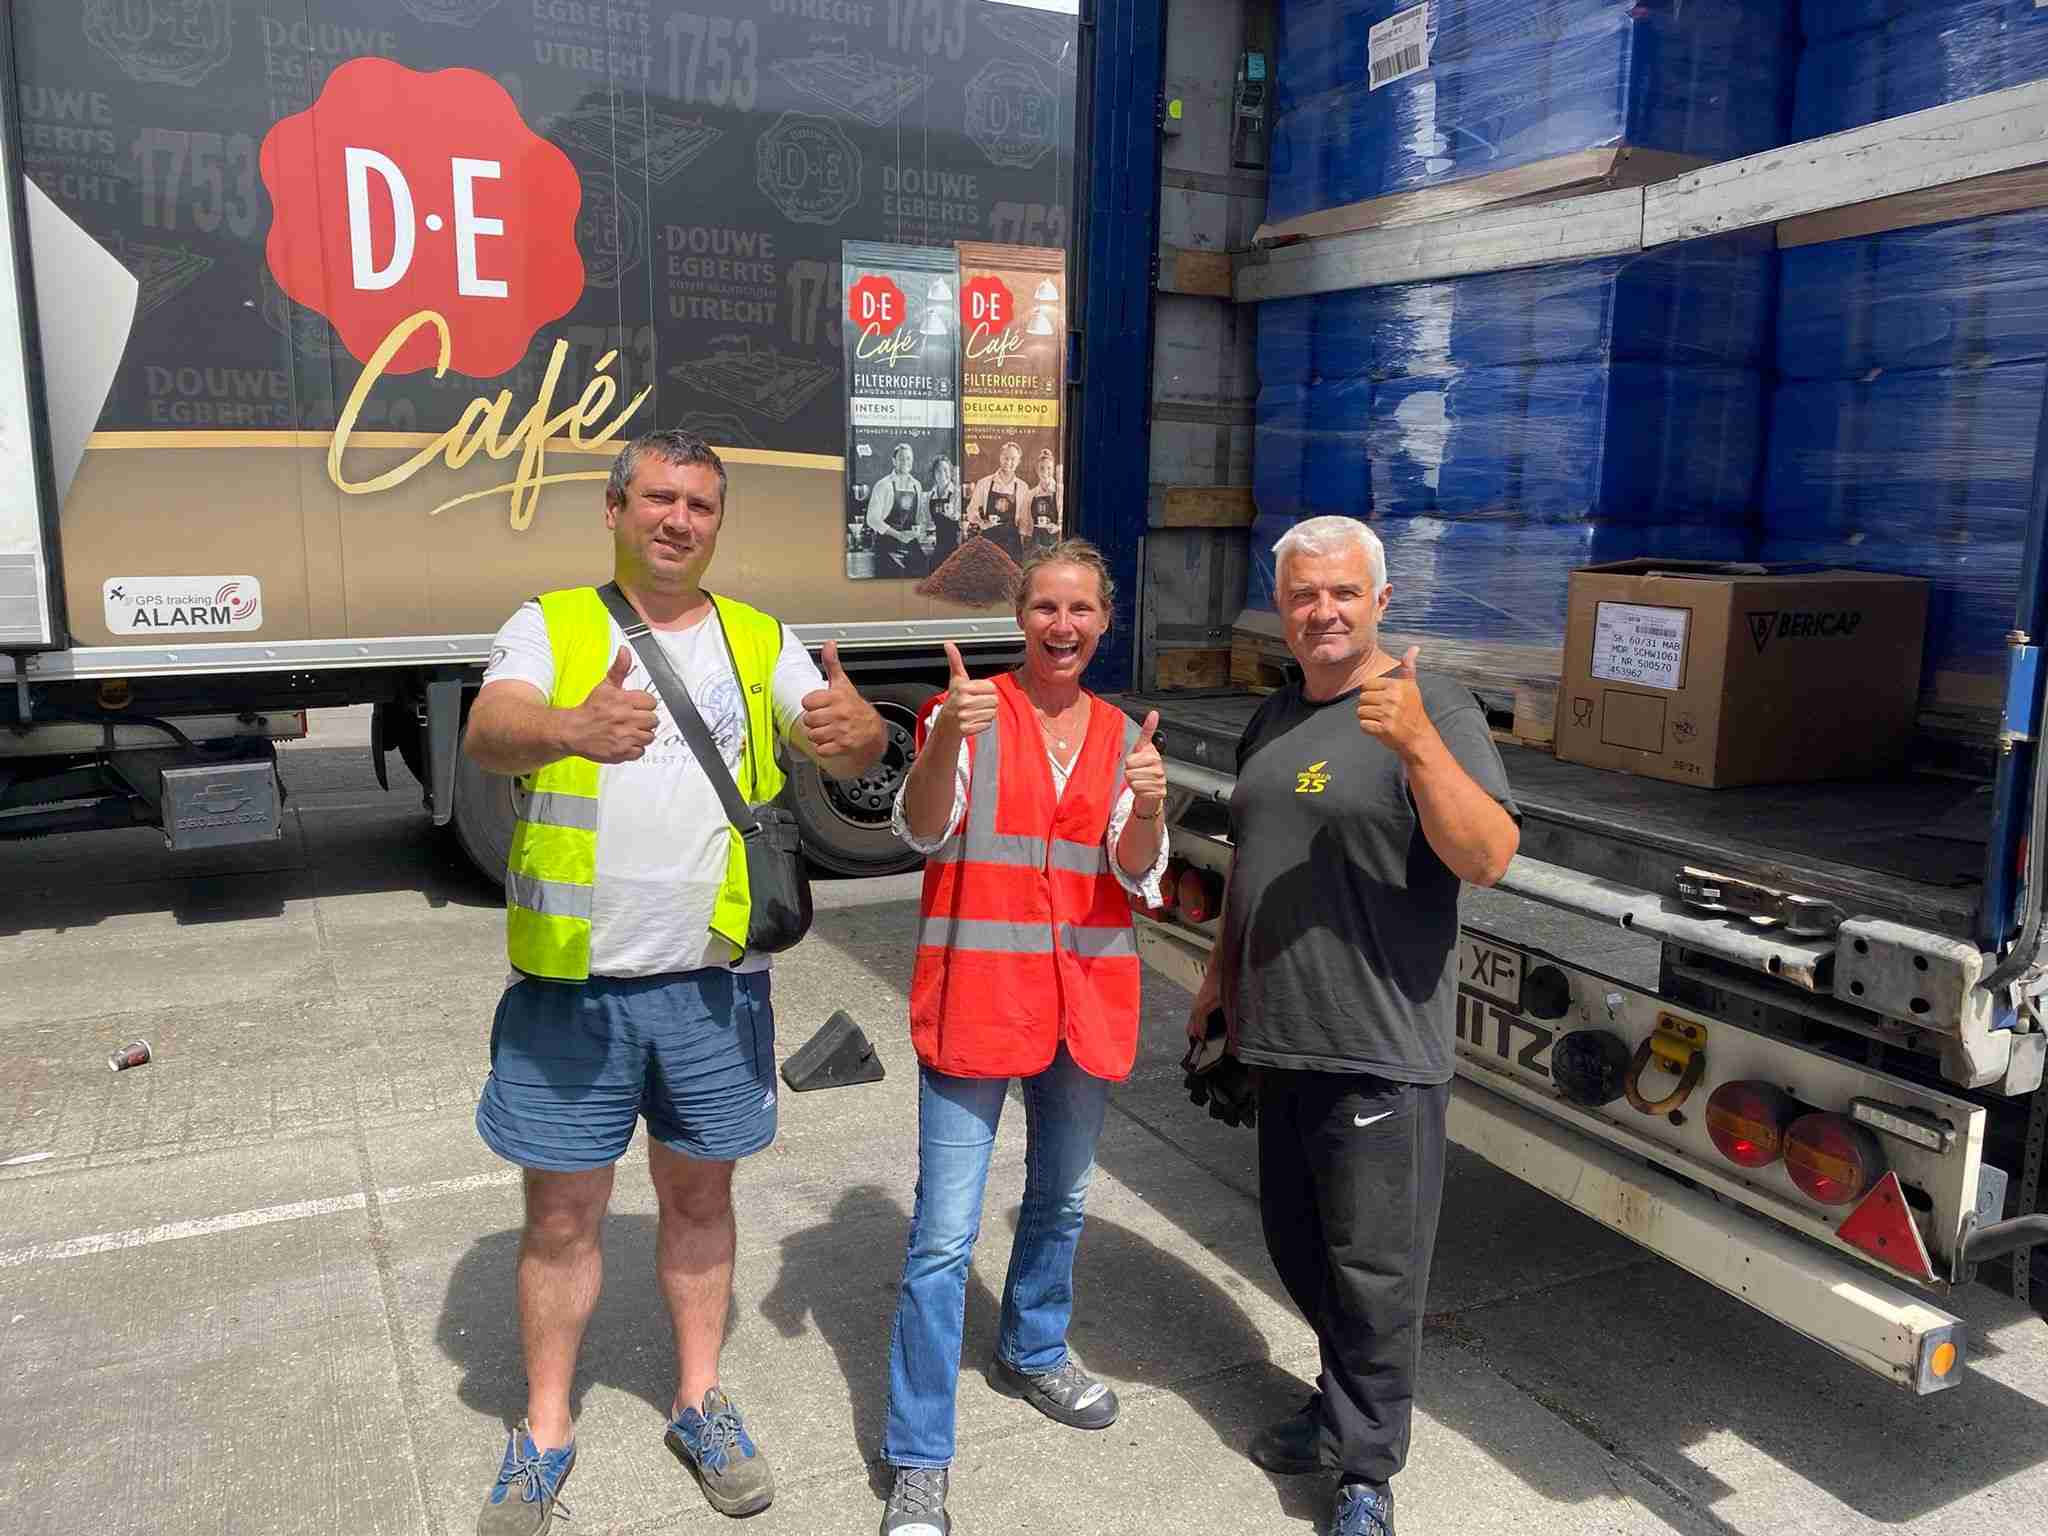 Trucks #20 and #21. Victor, Sylvia, and Milo. 135 days of LifeLine Ukraine. Who would have thought that one day of phonecalls with friends on the 4th of March, 135 days ago, would have led to 21 trucks of Aid being delivered to Ukraine! And still 22 trucks to go!